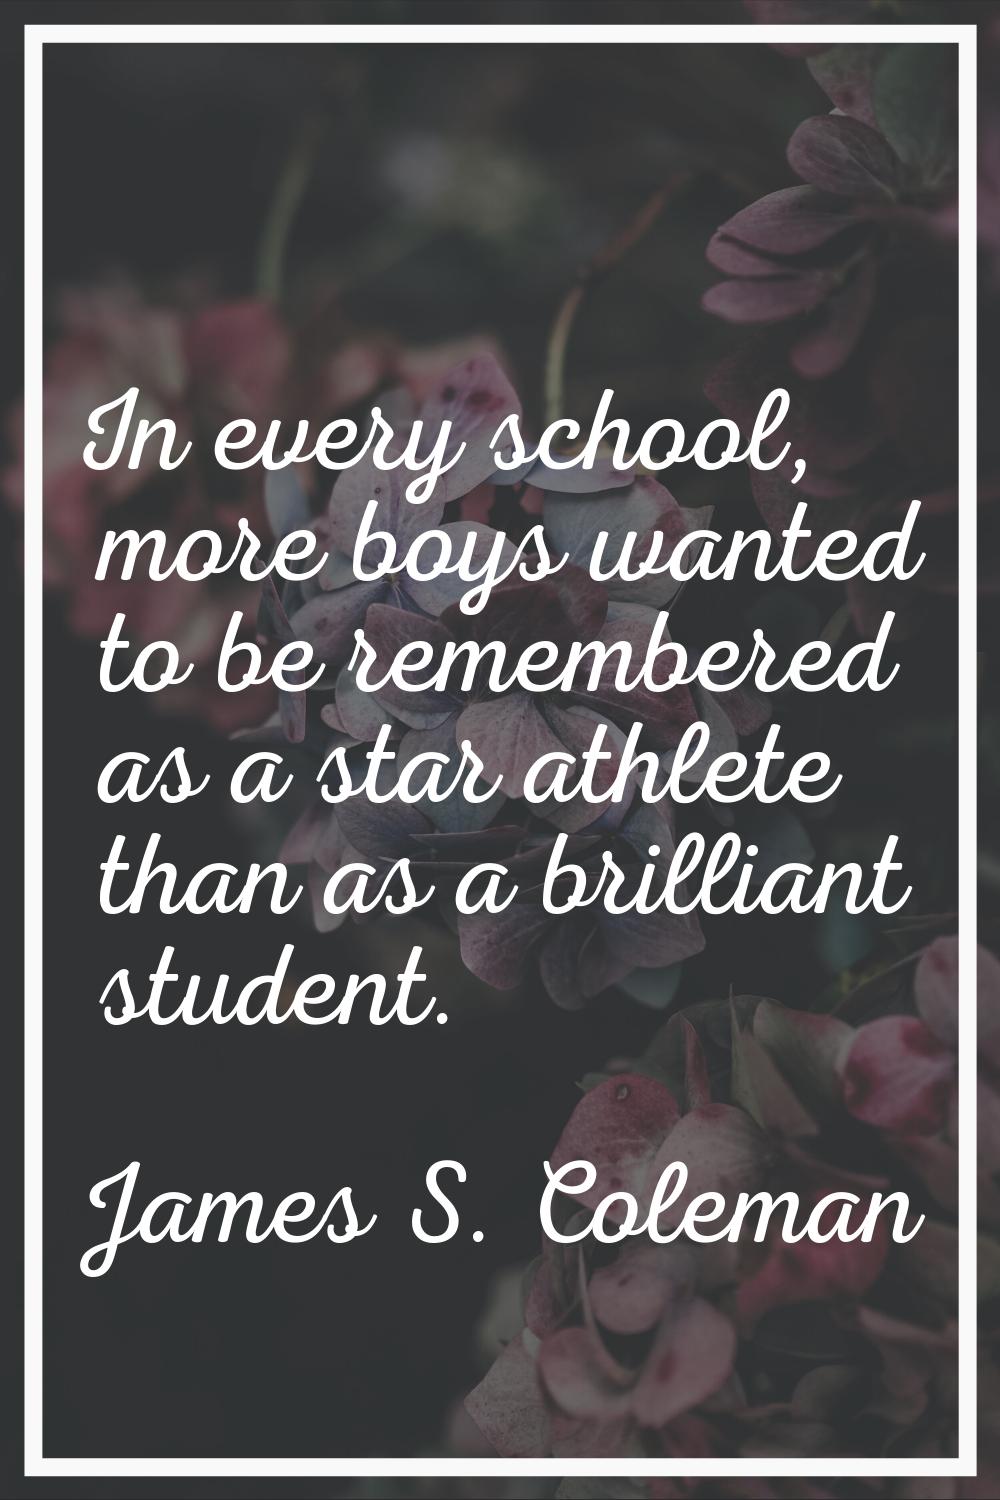 In every school, more boys wanted to be remembered as a star athlete than as a brilliant student.